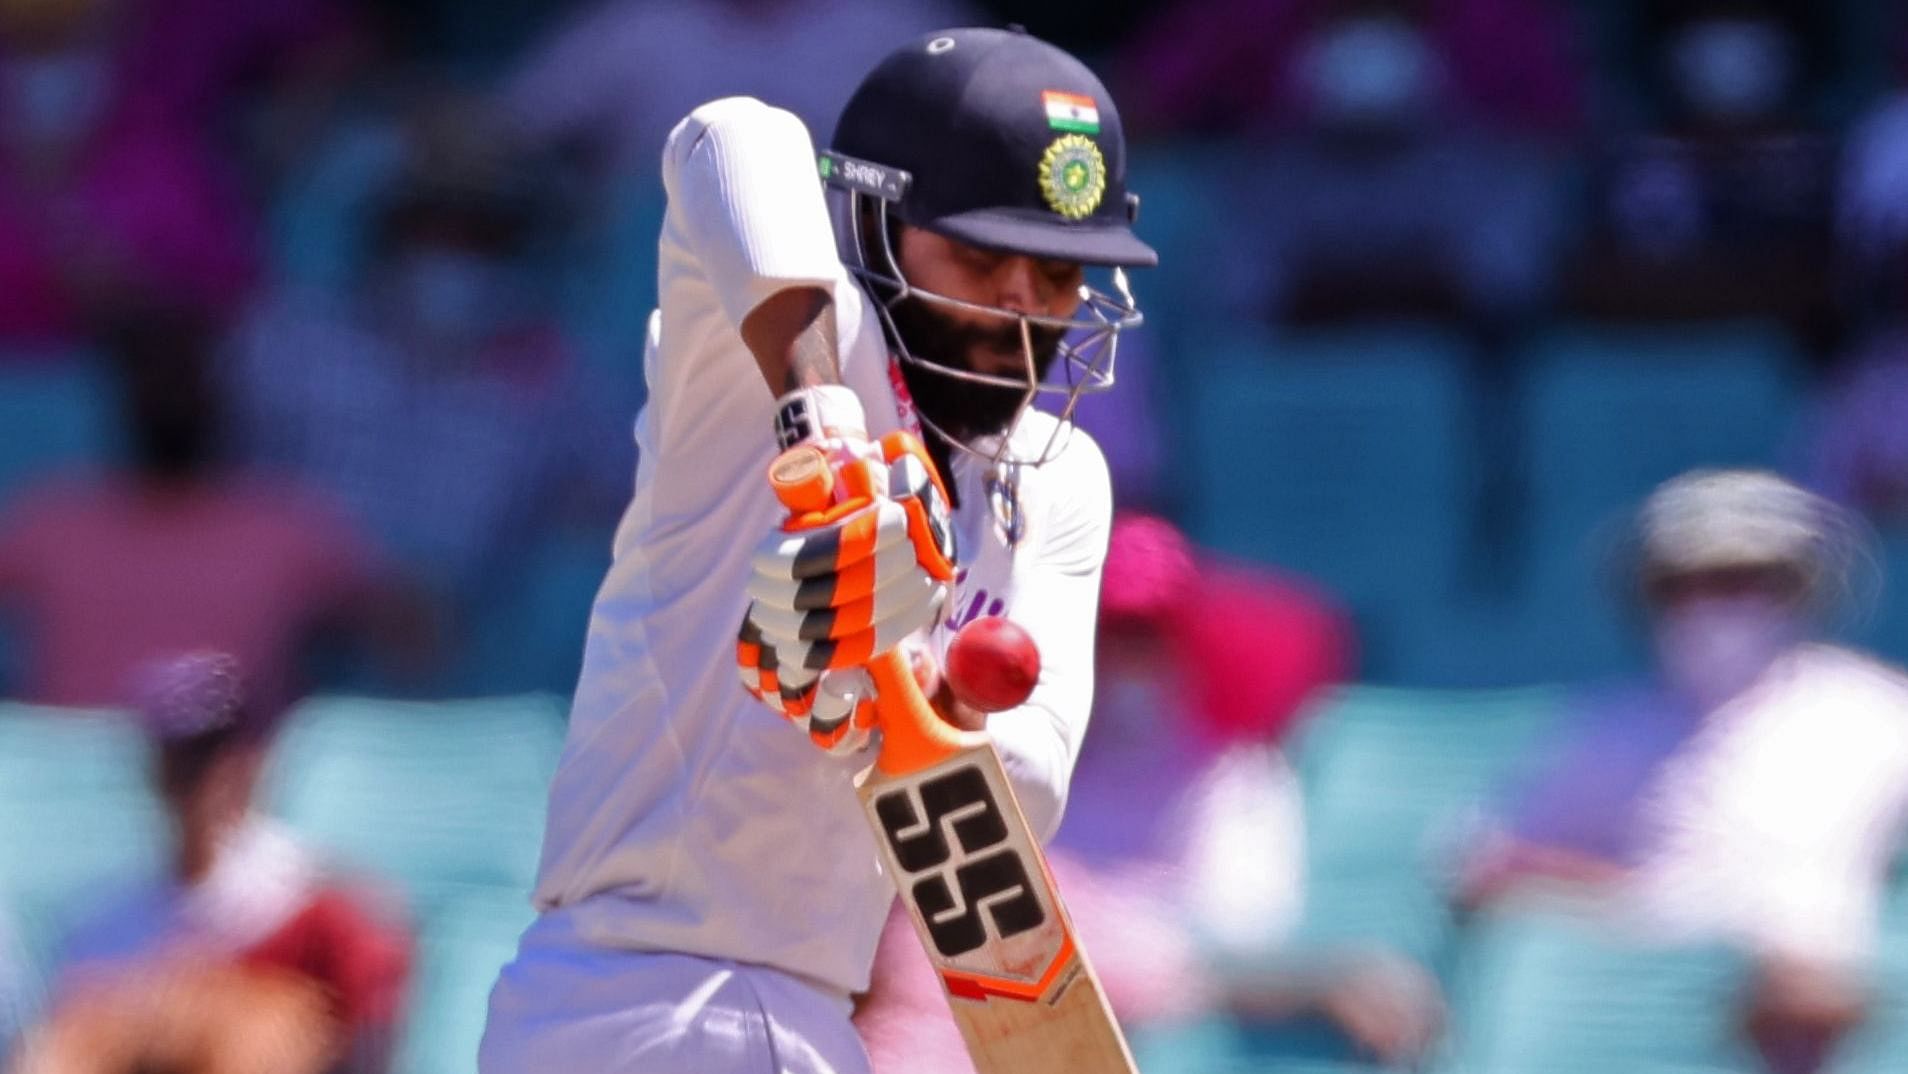 India's Ravindra Jadeja tries to play a shot on the third day of the third cricket Test match between Australia and India. Credit: AFP